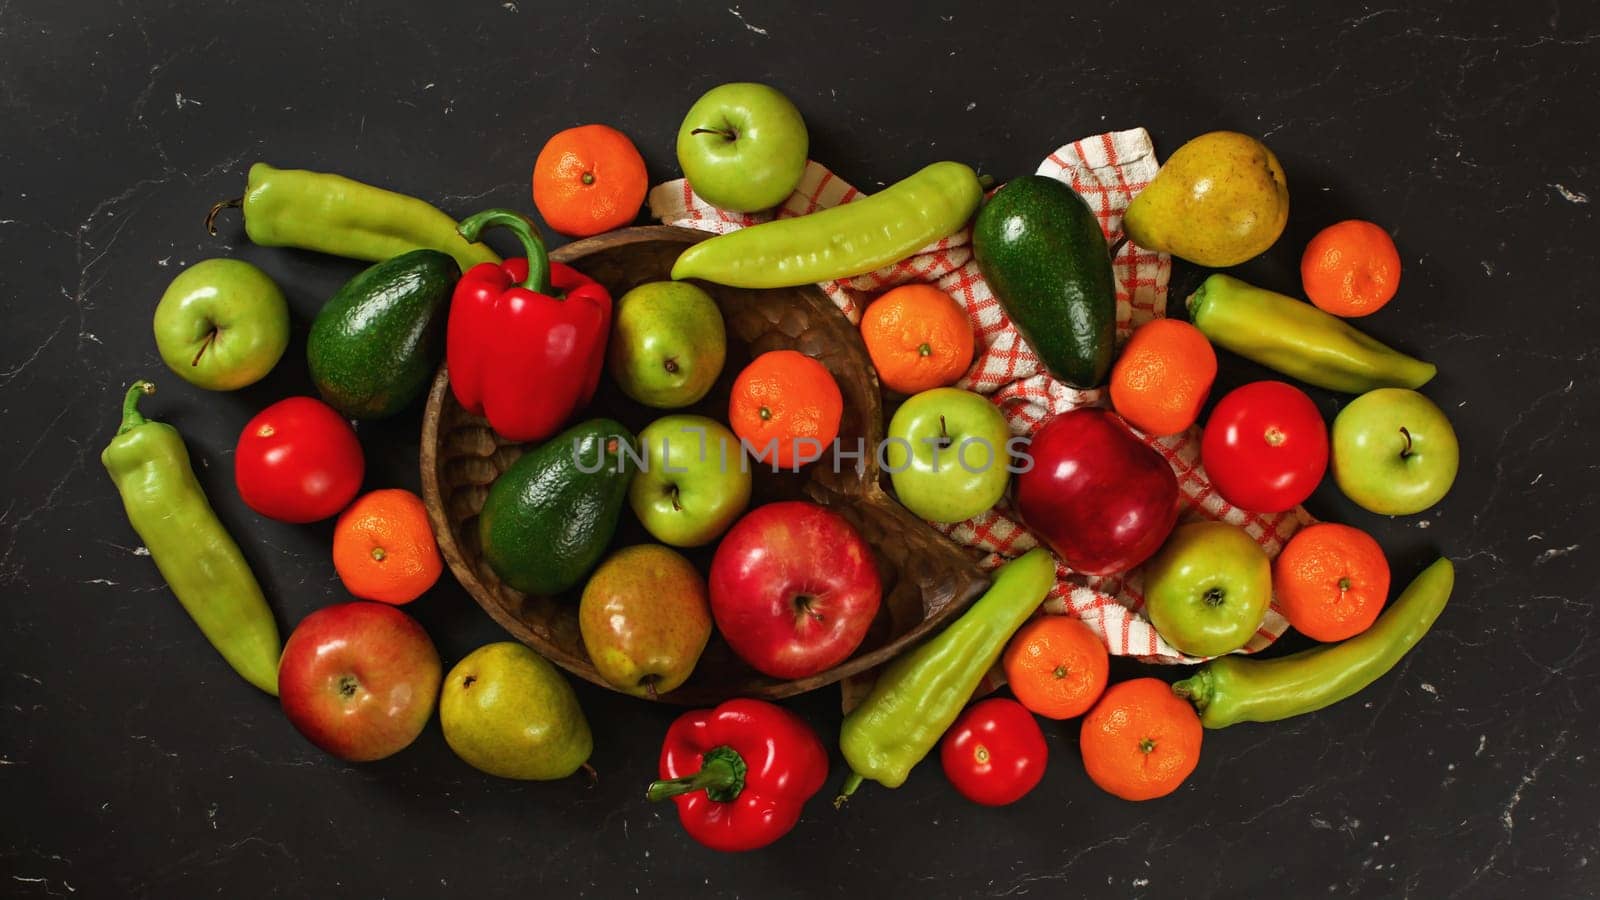 Mixed fruits and vegetables on black marble like board, healthy food concept, view from above by Ivanko